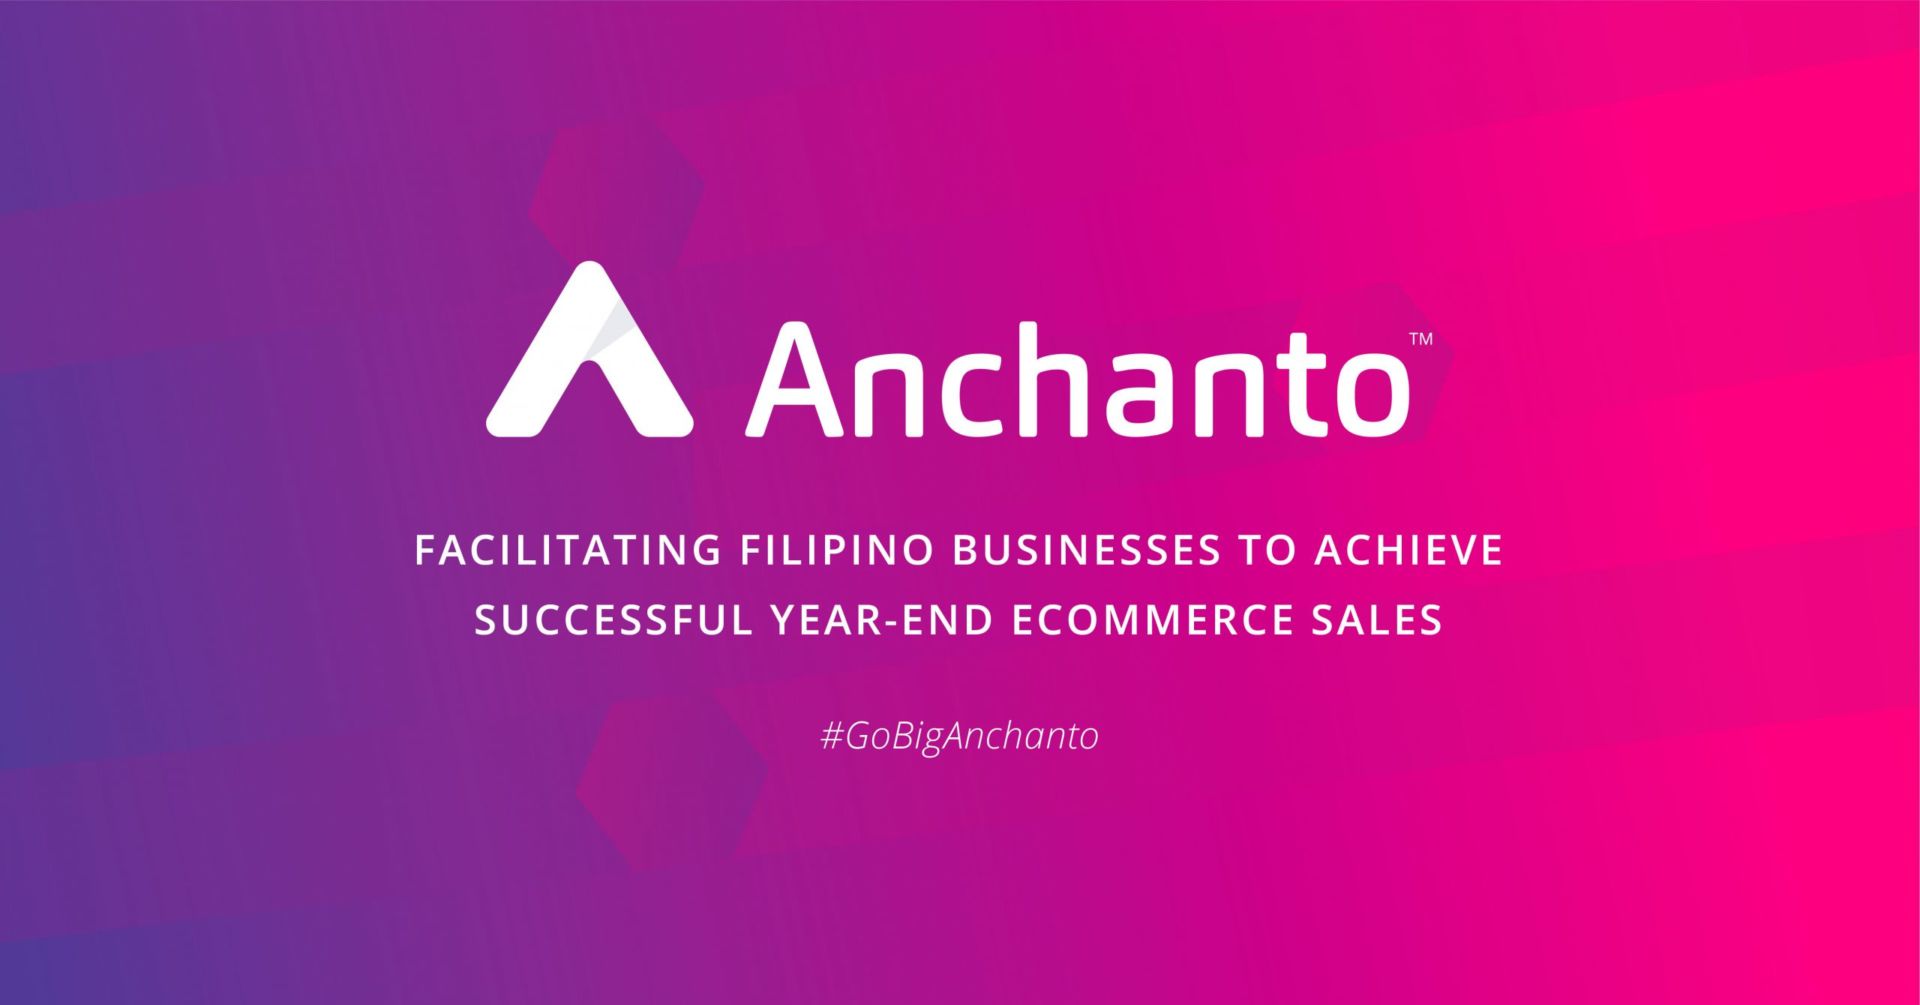 How Anchanto Facilitated Successful Year-End E-commerce Sales Amidst COVID-19